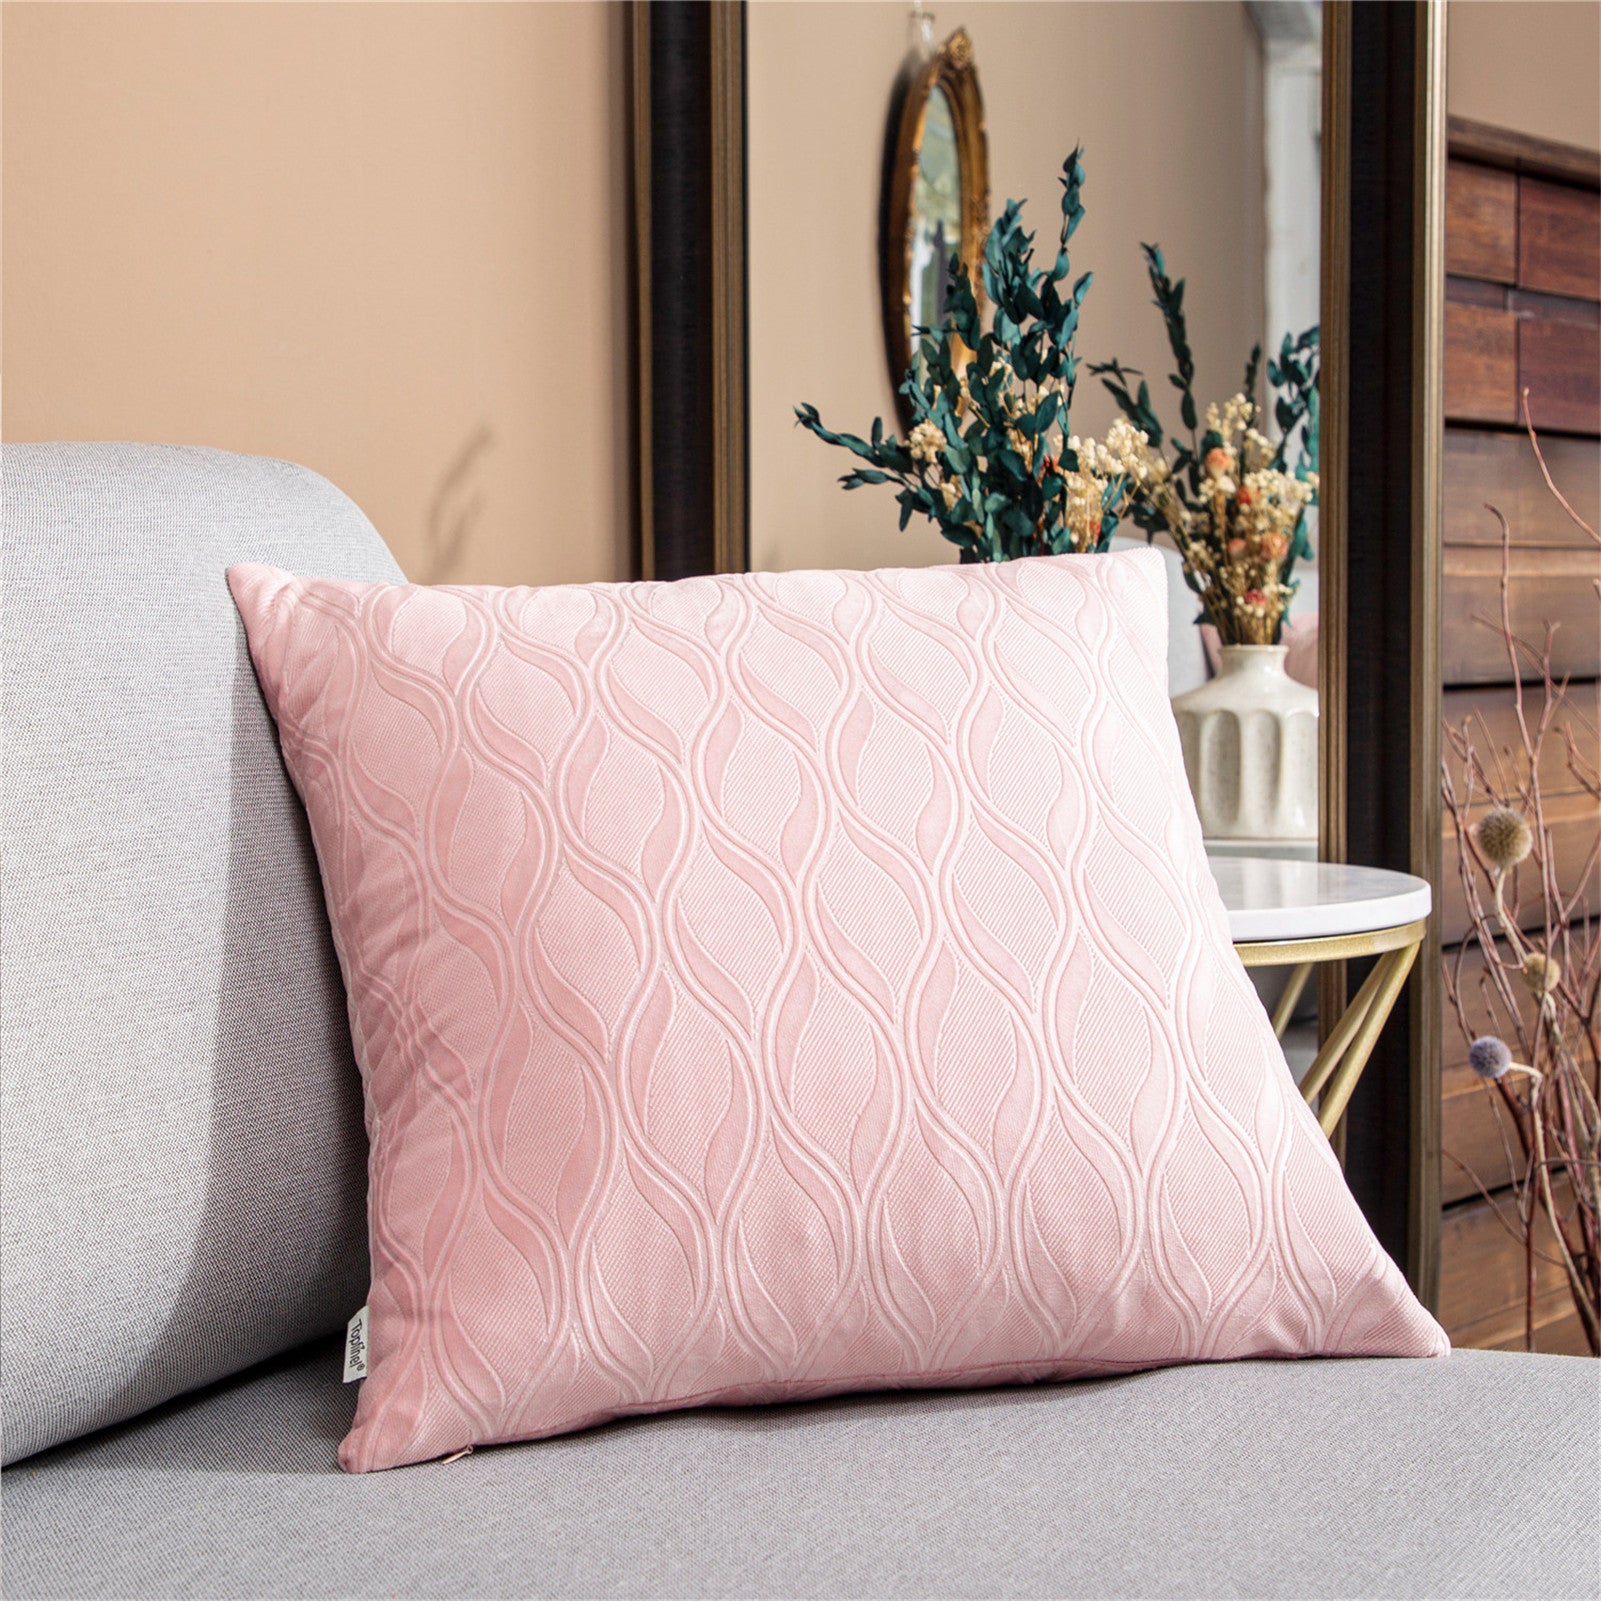 Velvet Solid Color Pillow Cover with Wave Pattern